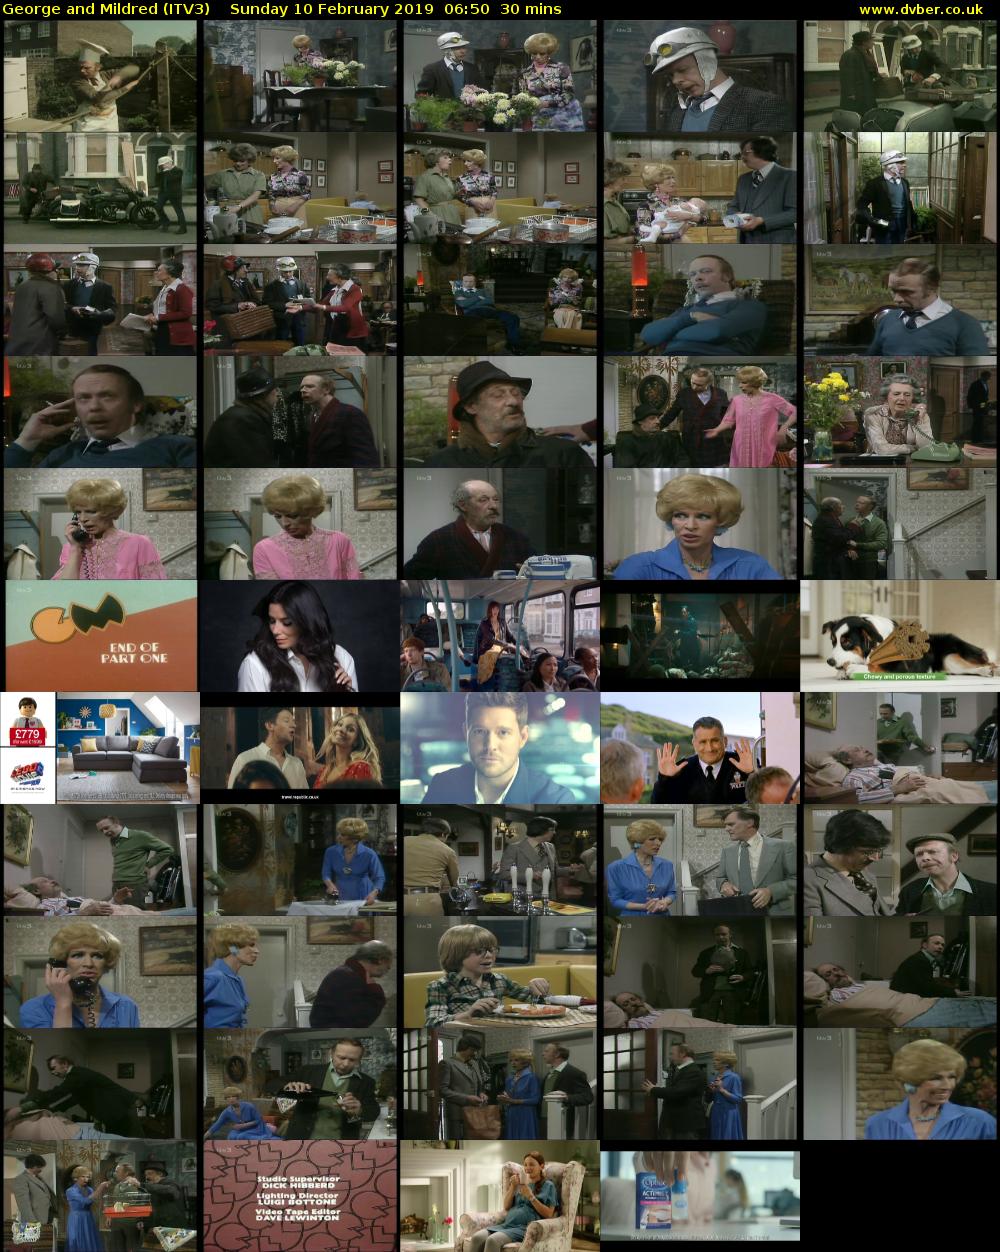 George and Mildred (ITV3) Sunday 10 February 2019 06:50 - 07:20